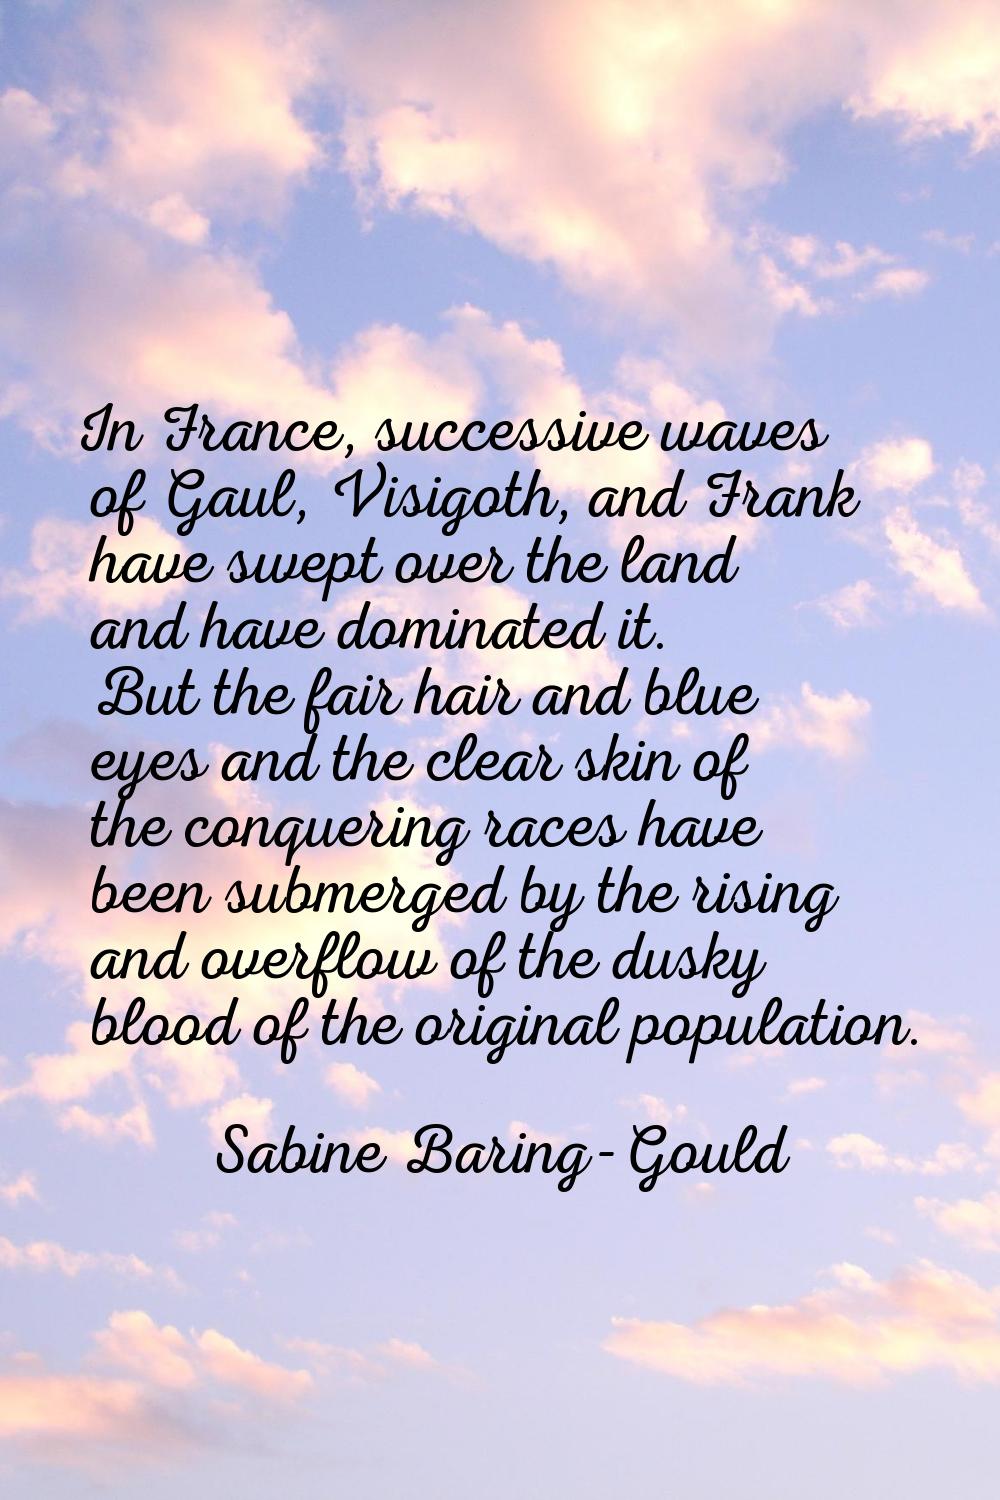 In France, successive waves of Gaul, Visigoth, and Frank have swept over the land and have dominate